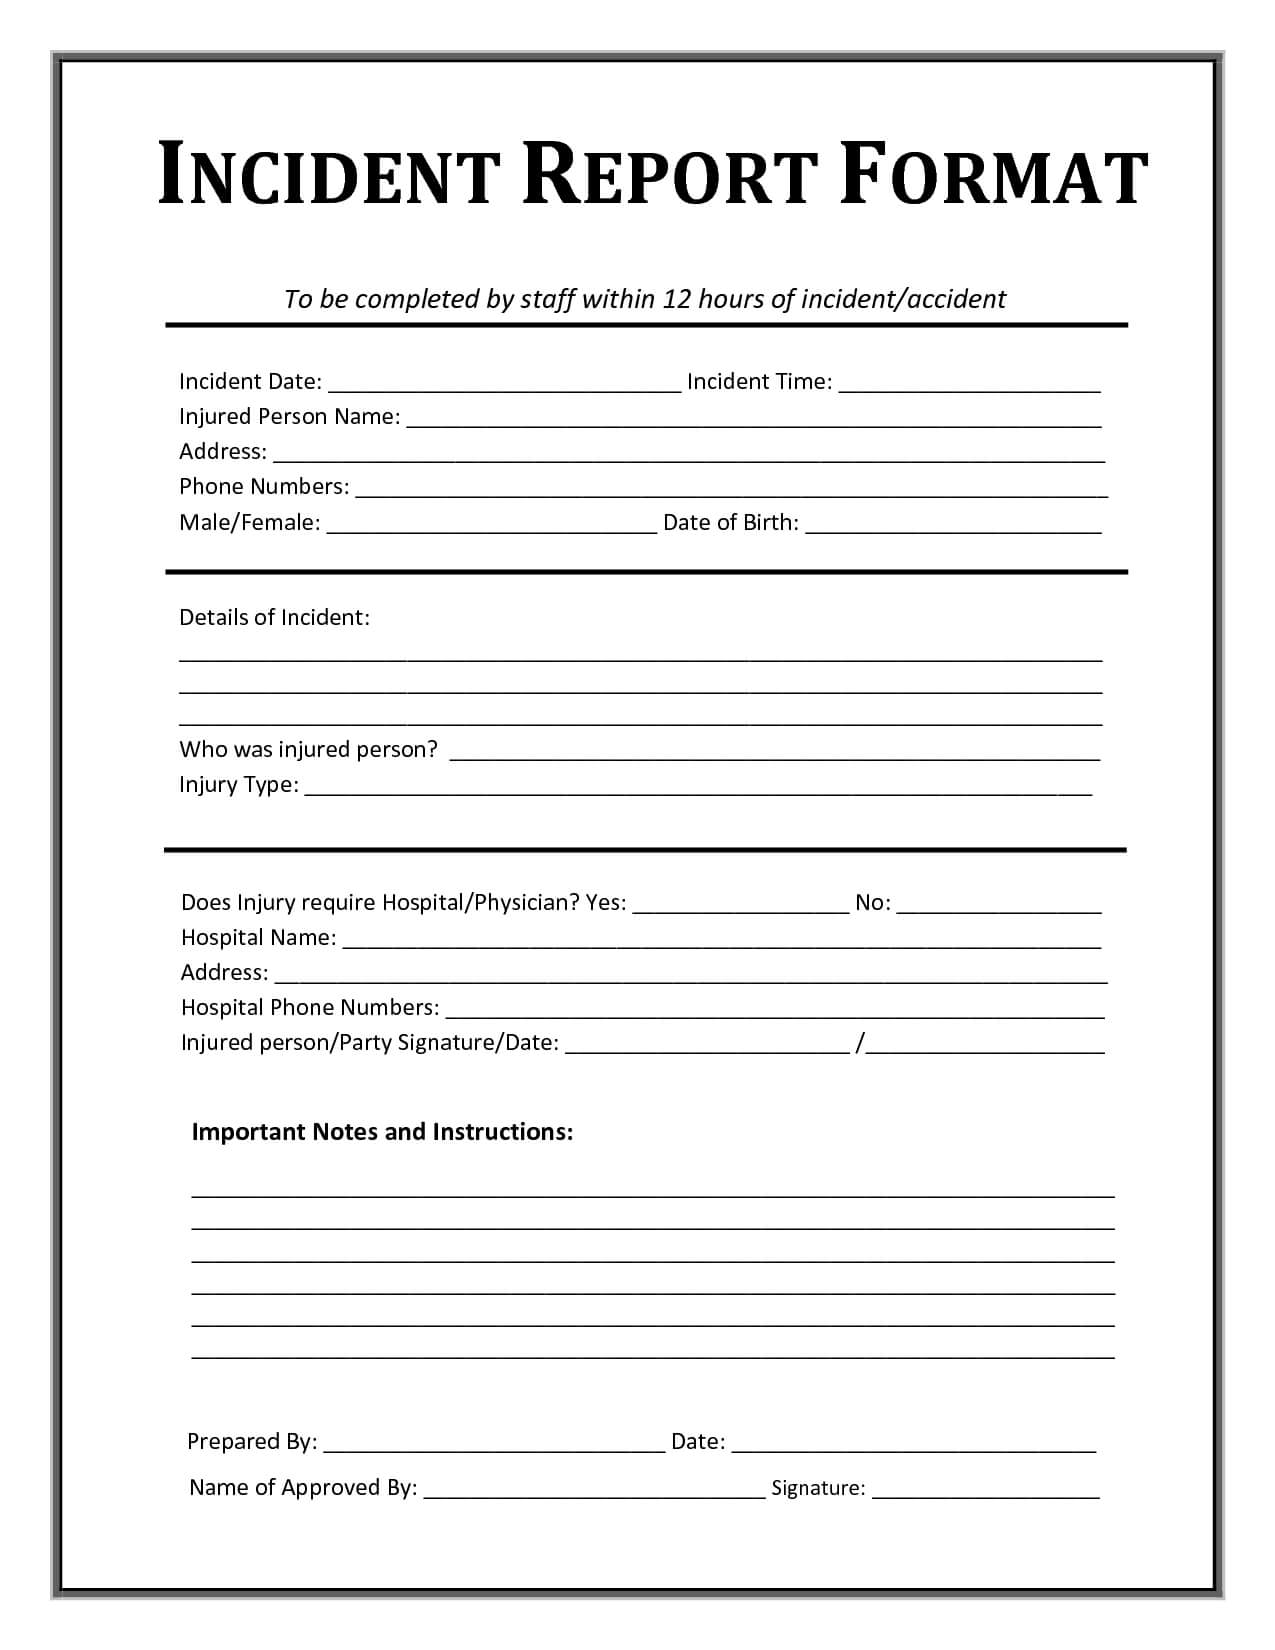 Incident Report Template | Incident Report Form, Incident With Generic Incident Report Template